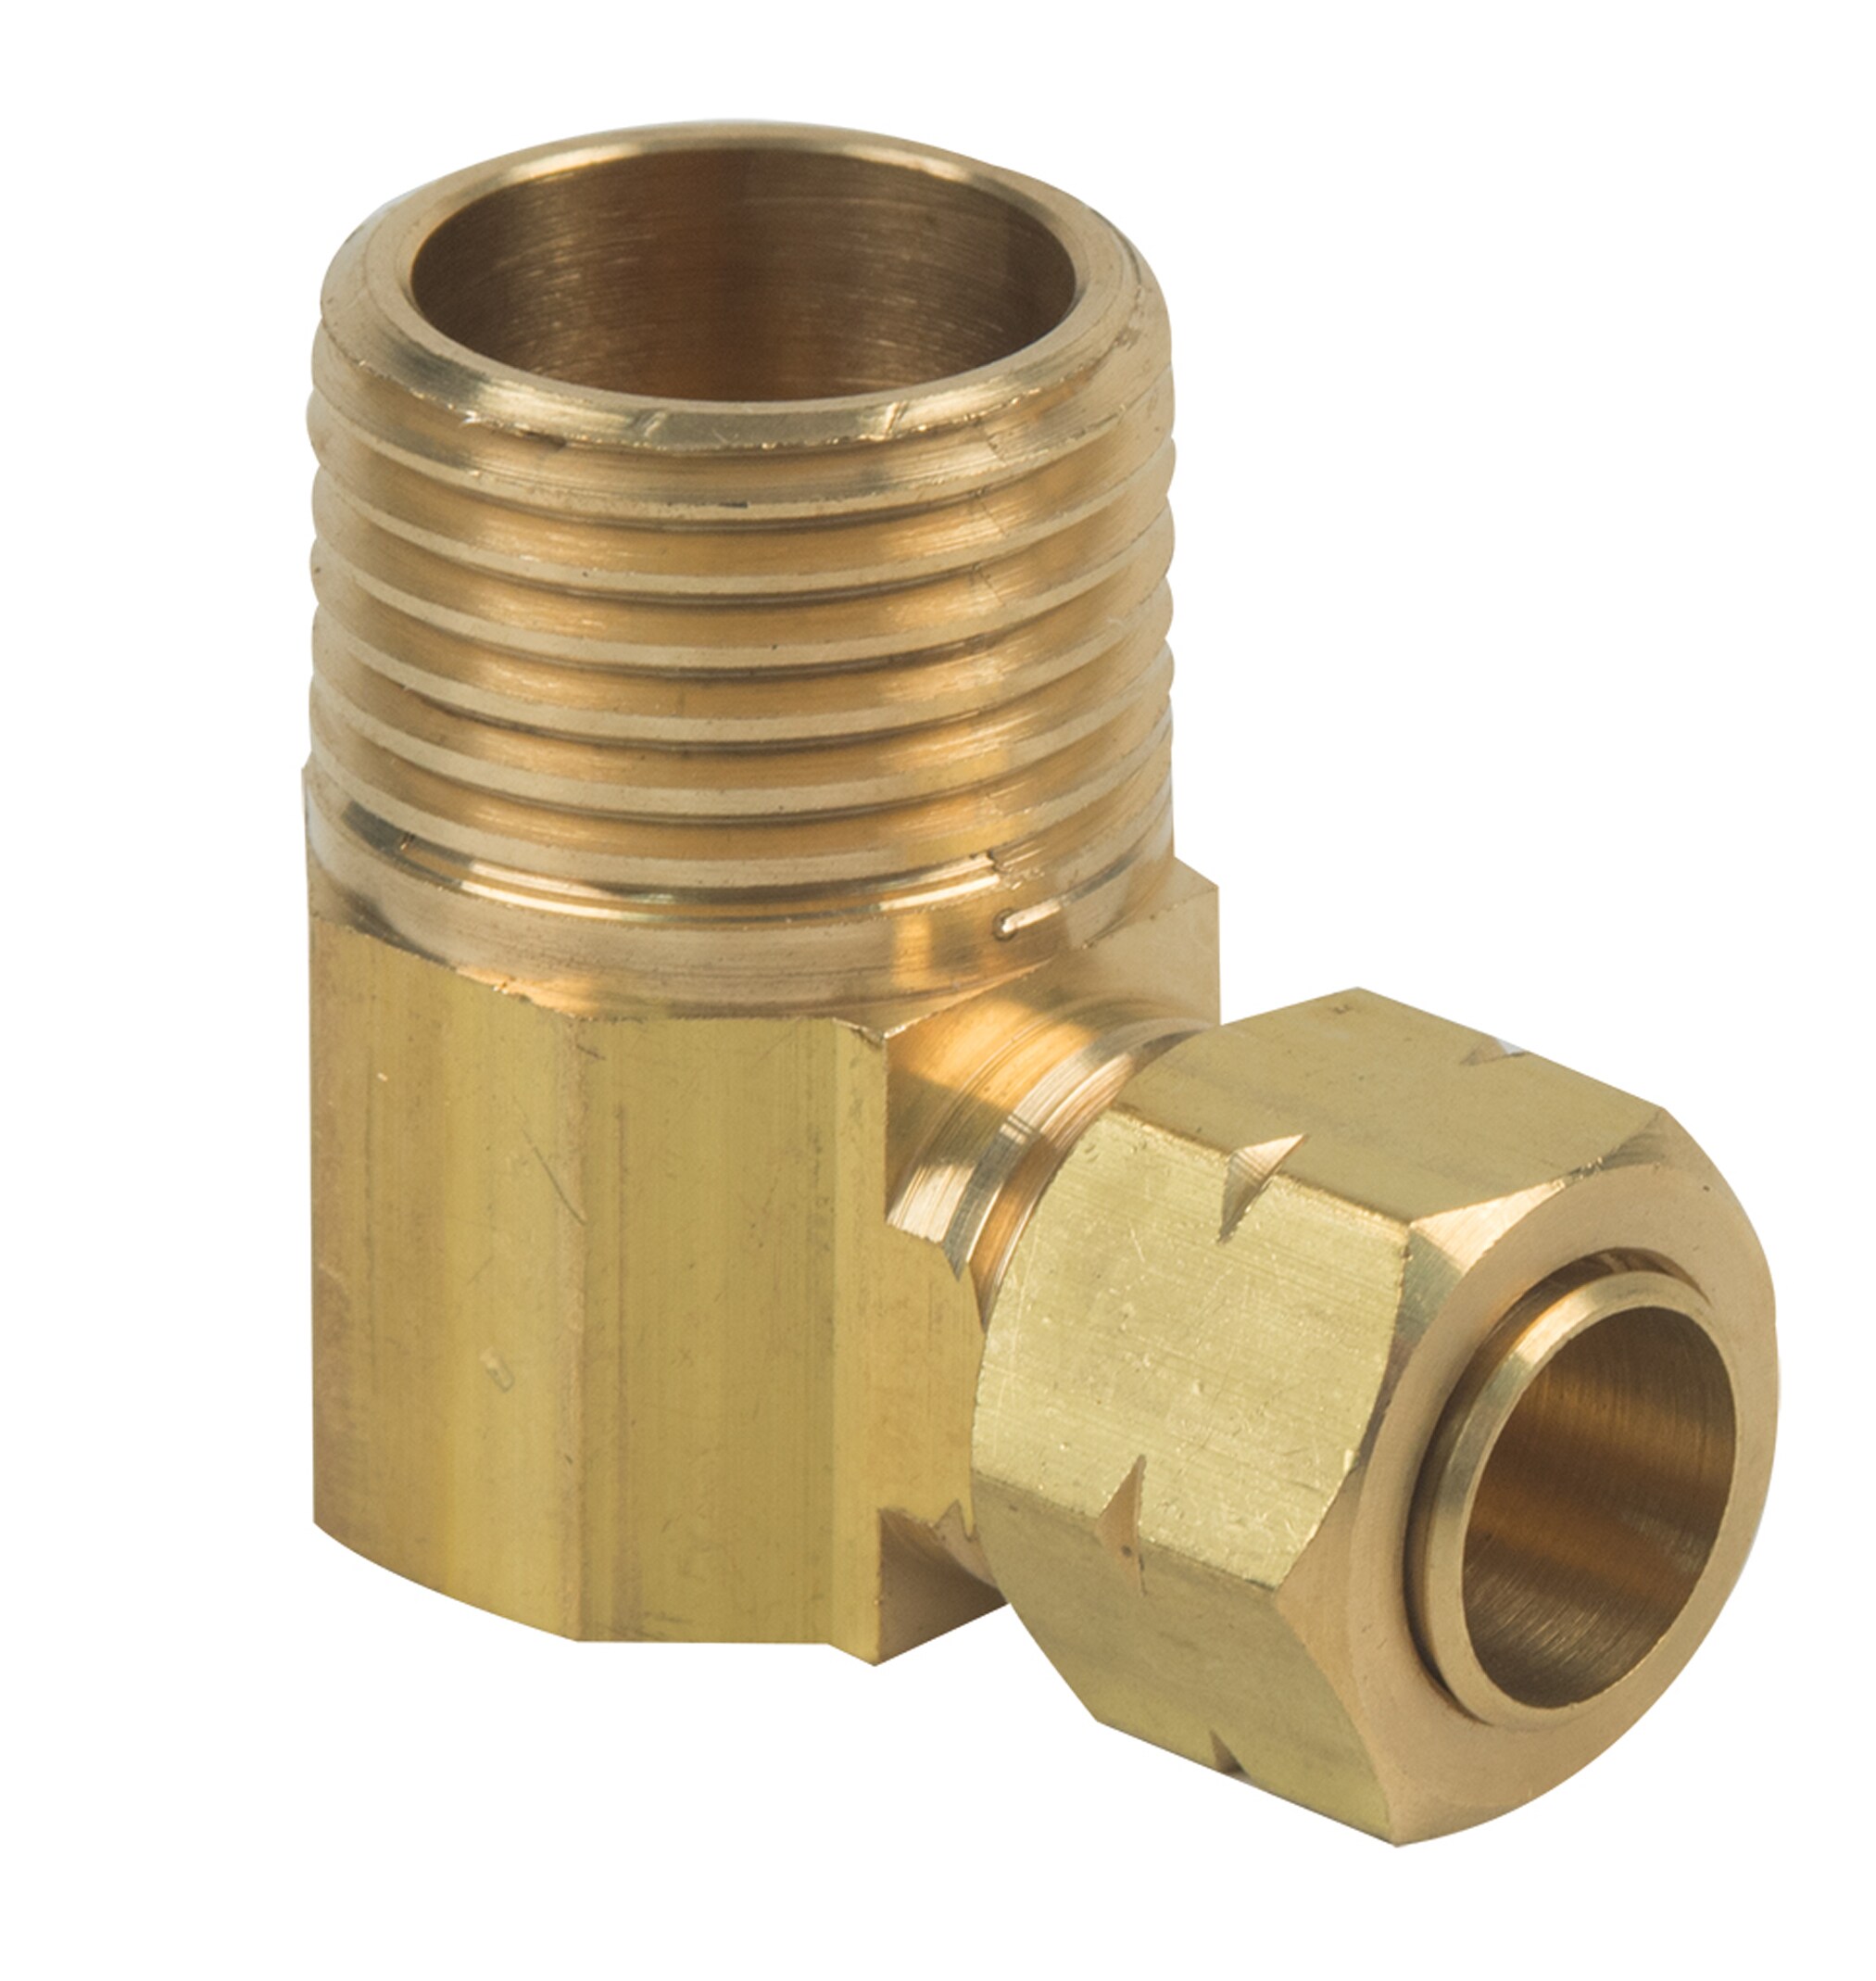 Tees Brass Compression Fittings Couplings 8,10,12,15,22,28mm Sizes WRA Elbows 